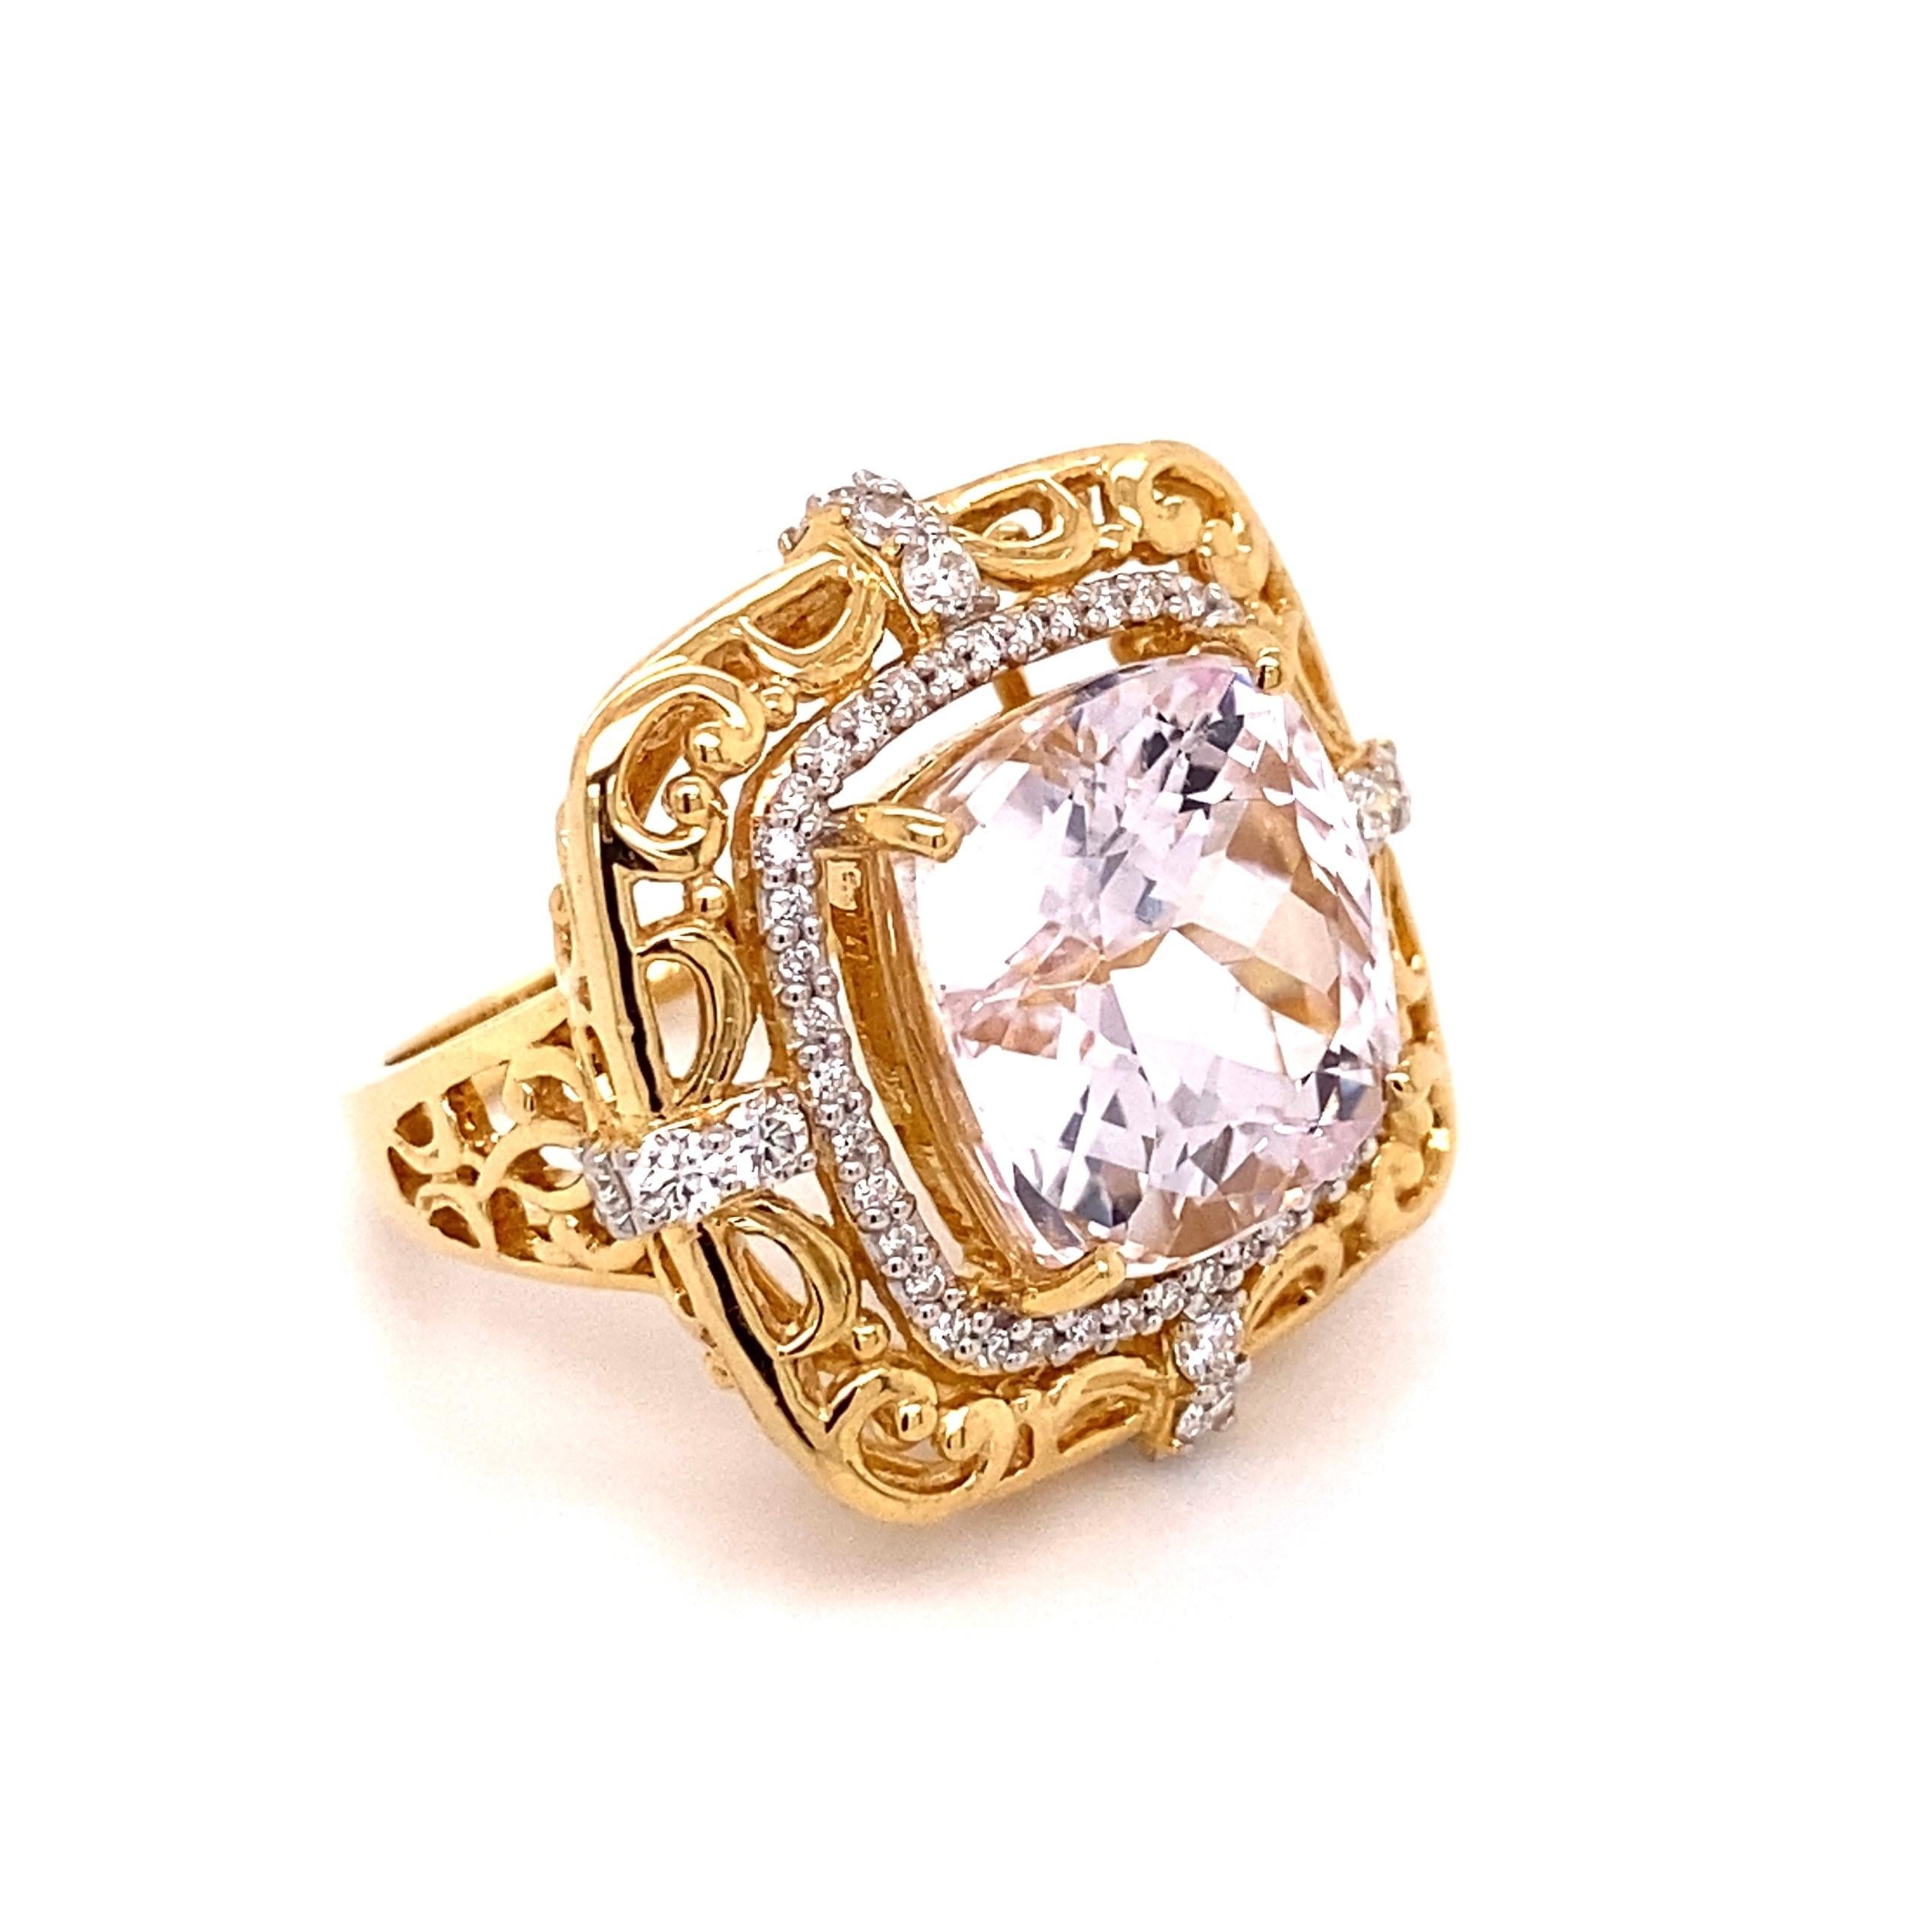 11.17 Carat Cushion Kunzite and Diamond Gold Cocktail Ring Estate Fine Jewelry In Excellent Condition For Sale In Montreal, QC